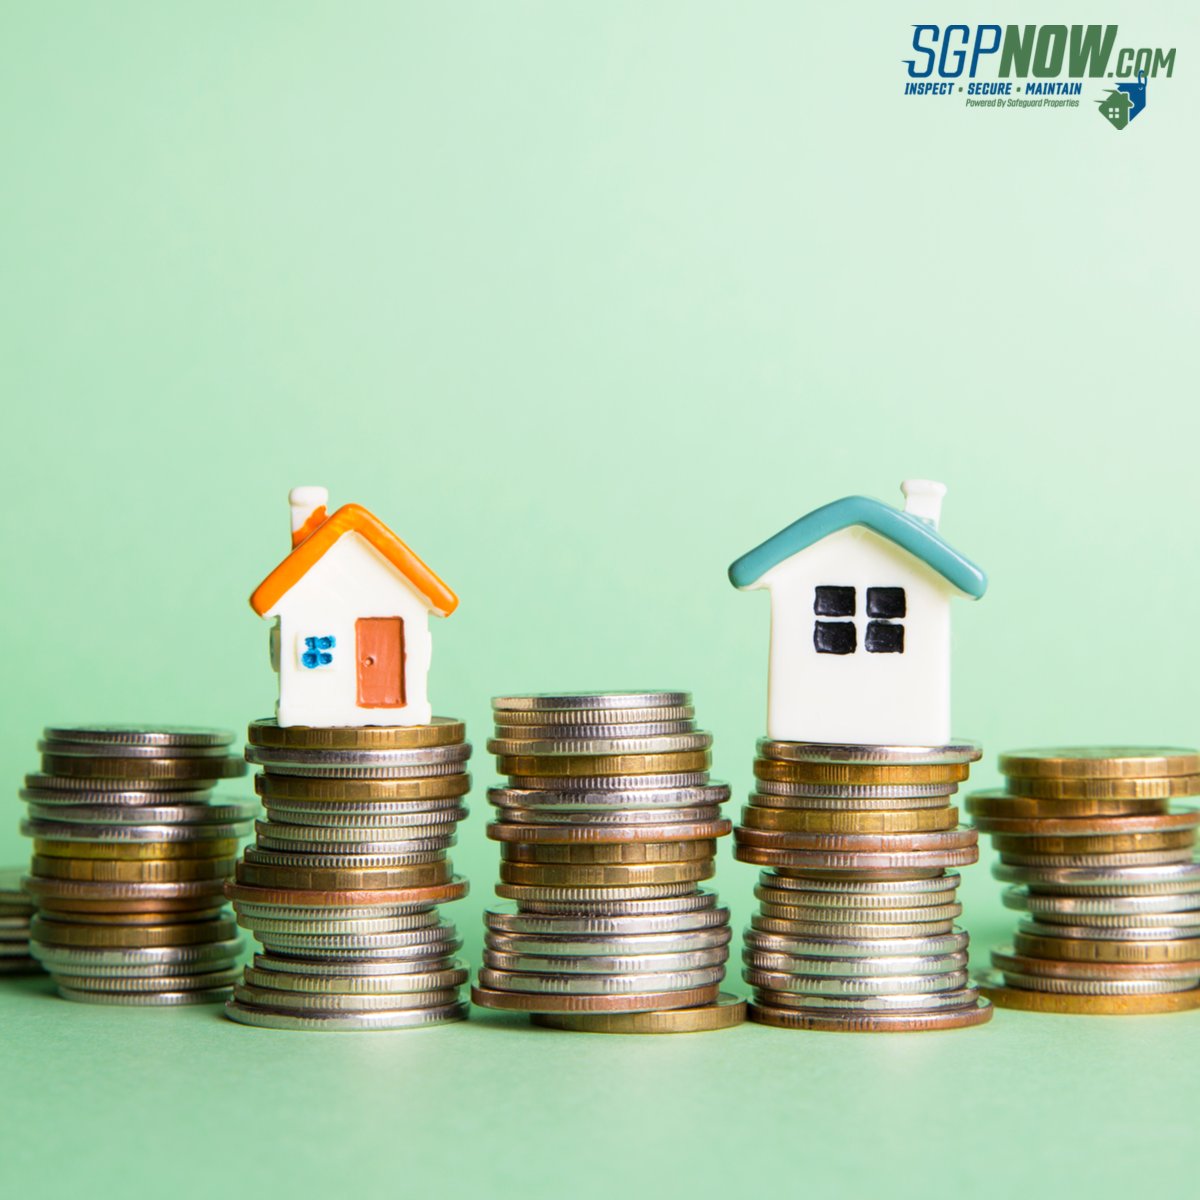 SGPNOW is revolutionizing the way property investors manage the maintenance of their assets.  Read our blog to find out how, when it comes to property maintenance, we have you covered.  bit.ly/3JwHs6Q

#SGPNOW #InvestmentProperty #RealEstate #PropertyManagement #Investor